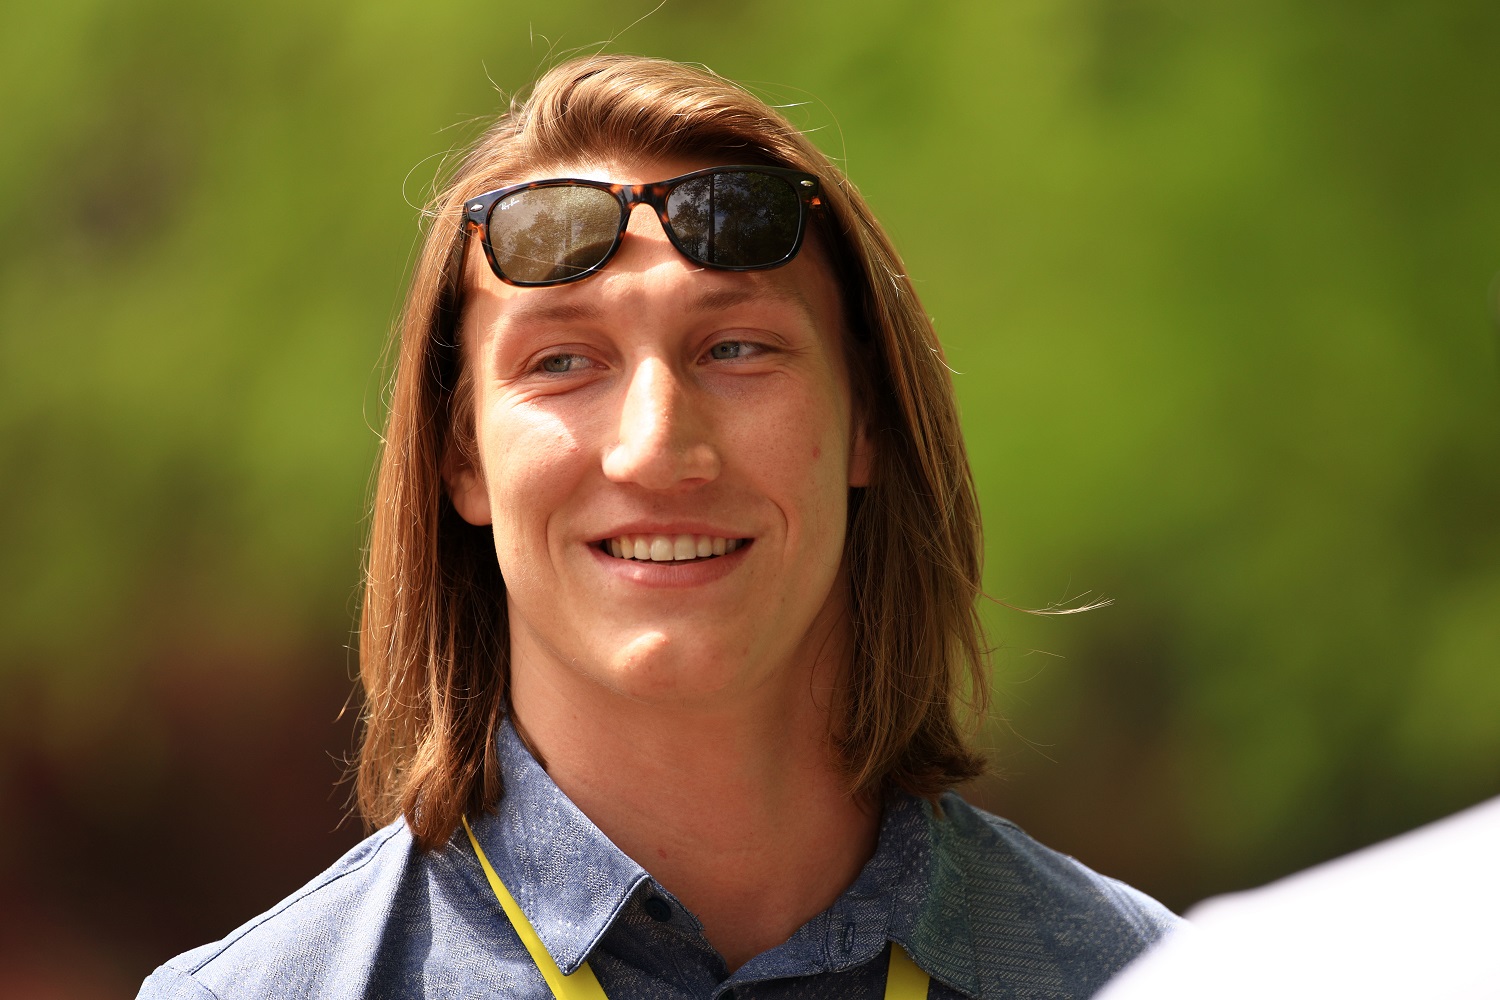 Clemson quarterback Trevor Lawrence, the likely No. 1 pick in the 2021 NFL draft, is showing his gratitude to Jacksonville Jaguars fans by donating to area charities.